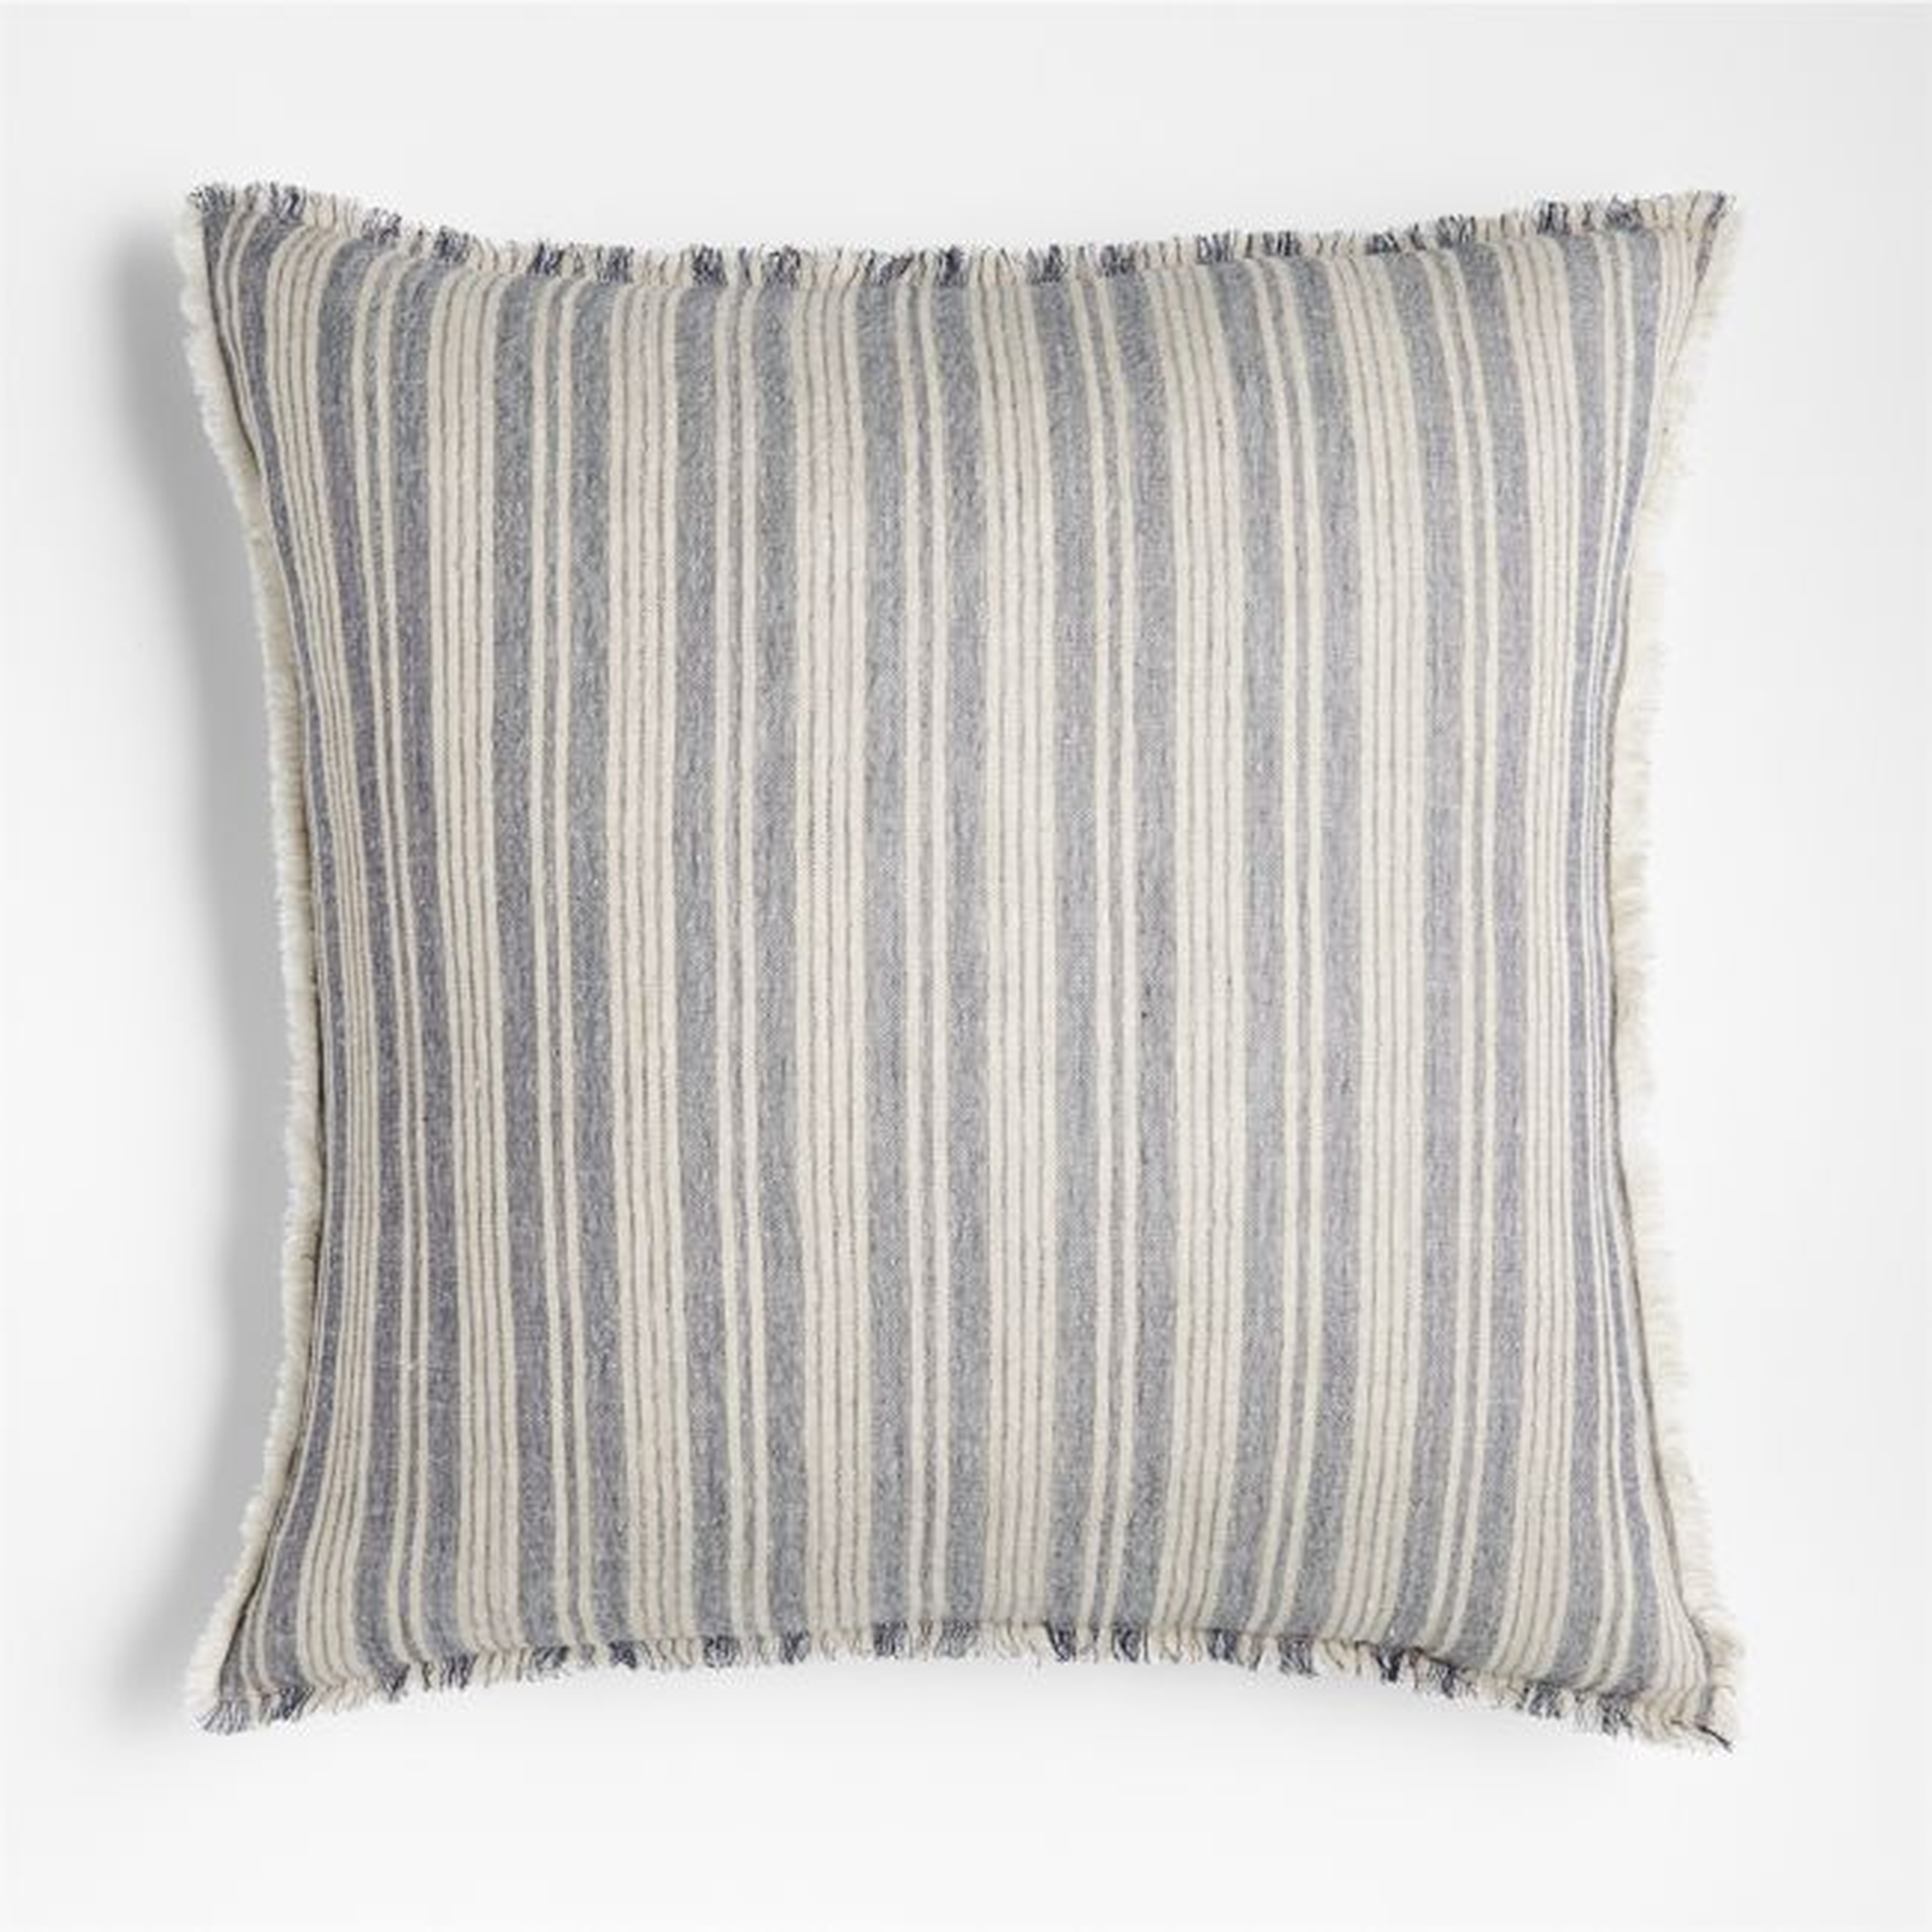 Arla 23"x23" Eyelash Striped Blue Throw Pillow Cover - Crate and Barrel